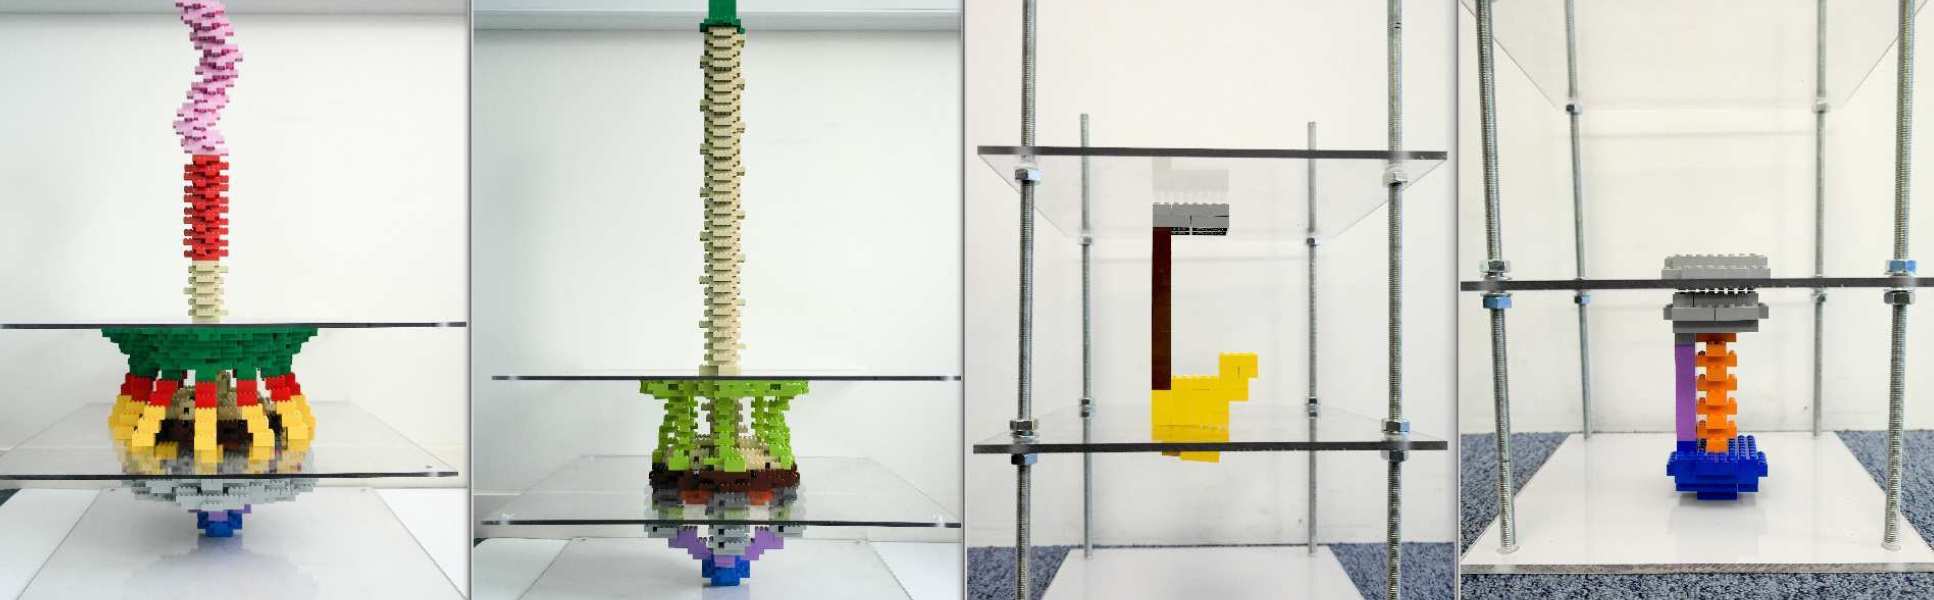 Lego sculptures on display at Imperial Festival